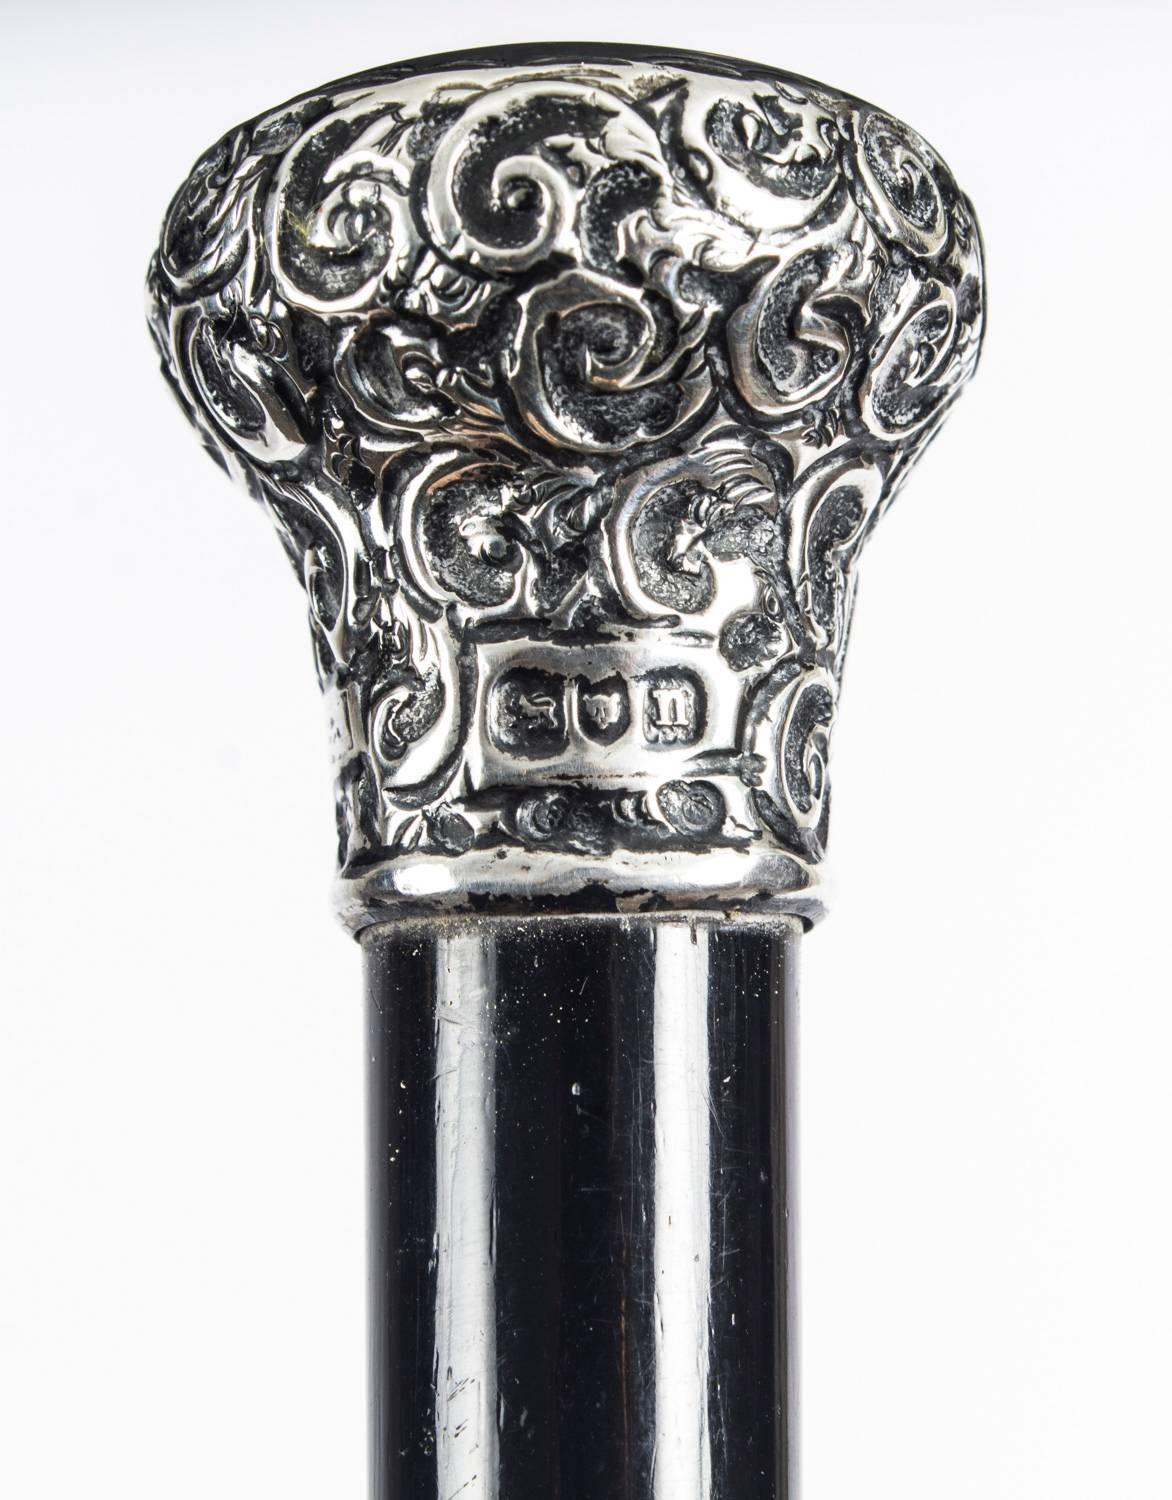 This is a beautiful antique English Edwardian silver mounted conductor's baton that has hallmarks for London, 1908.

The fully ebonized and sterling silver mounted tapered cylindrical baton features wonderful scrolling decoration to the silver